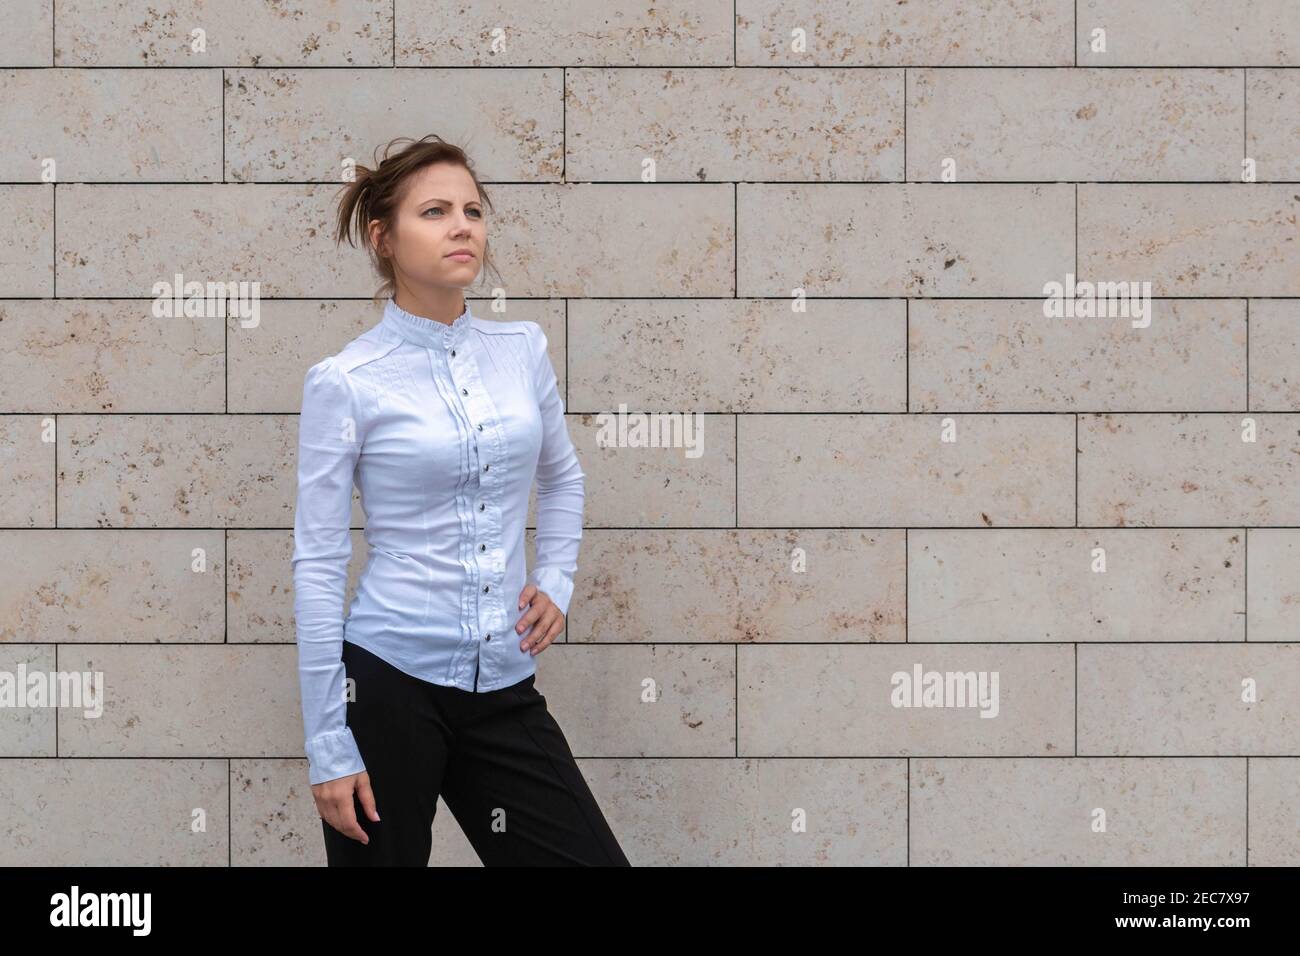 Attractive woman in white shirt standing on marble brick wall background and looking ahead. Successful and purposeful woman concept. Copy space. Stock Photo